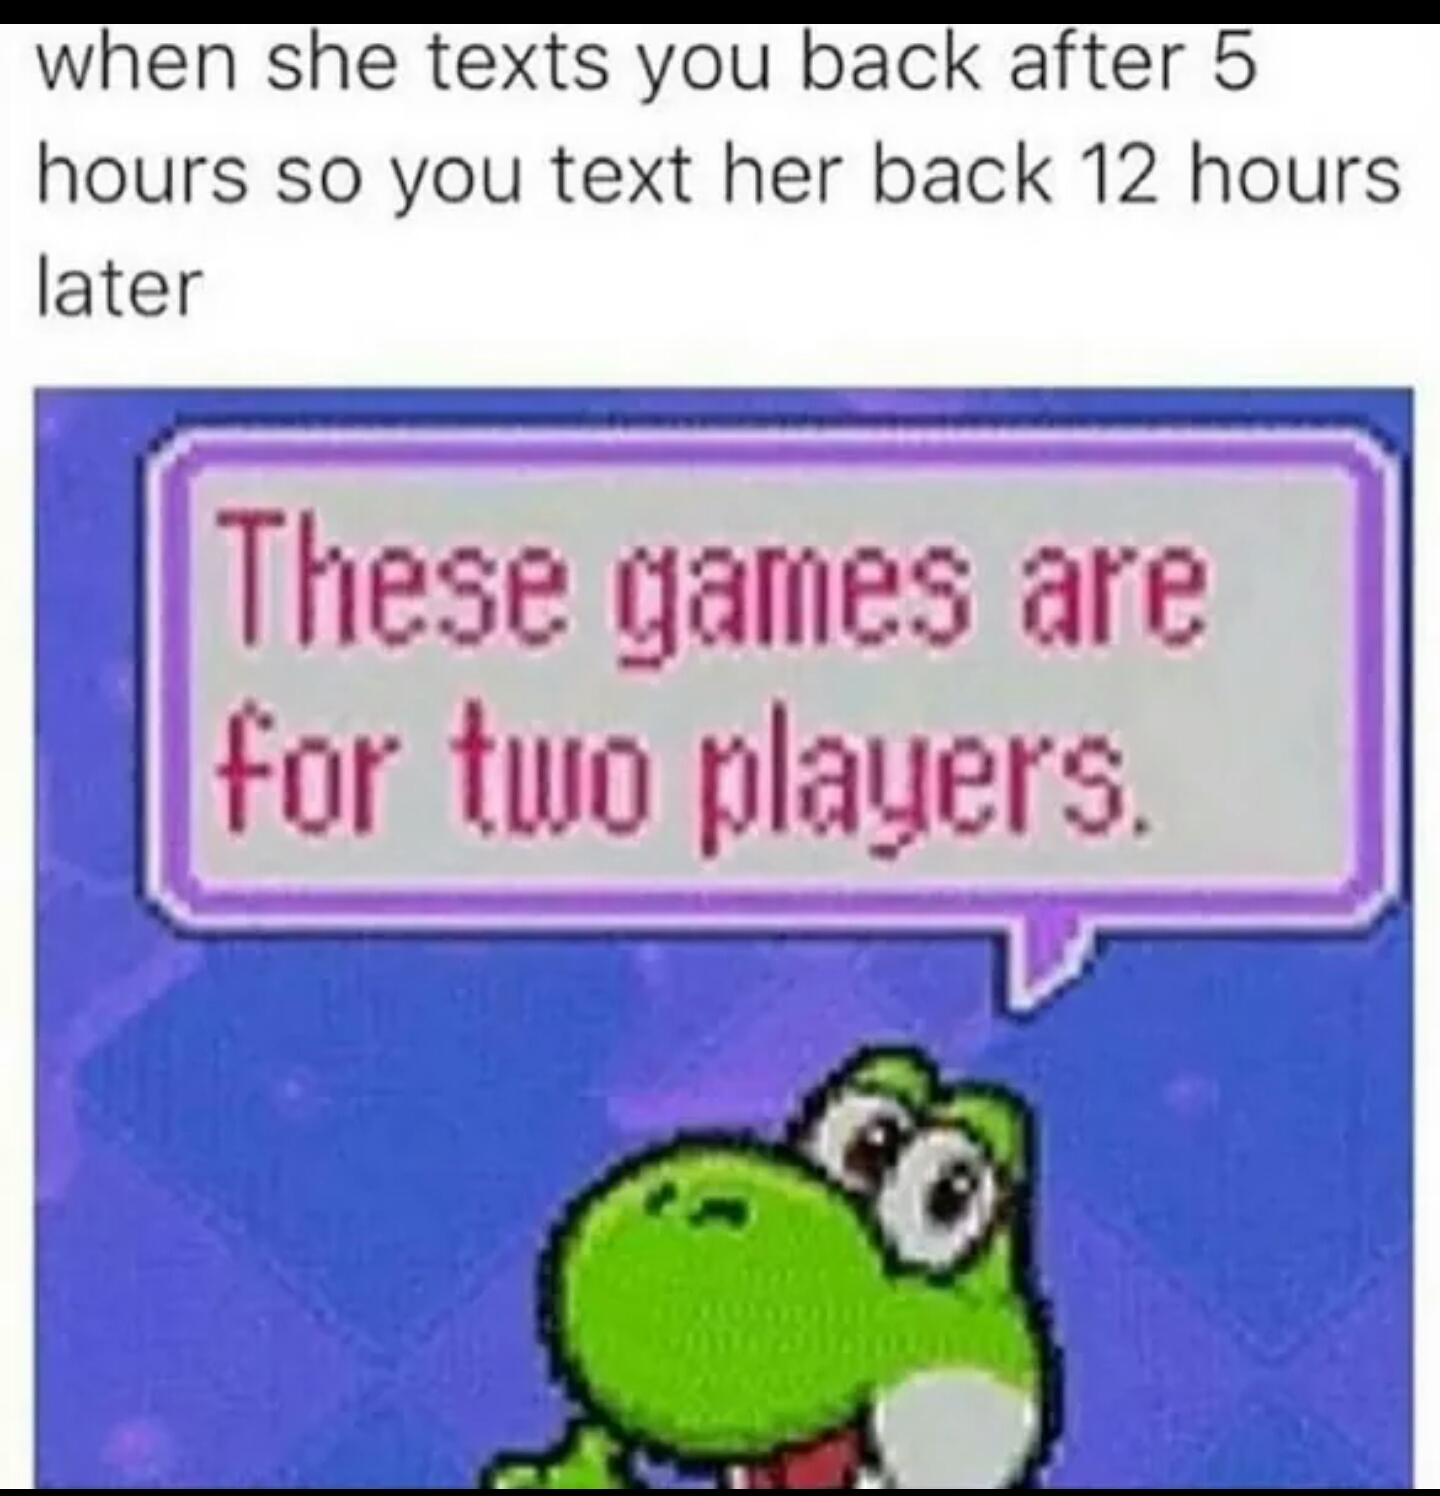 game is for two players meme - when she texts you back after 5 hours so you text her back 12 hours later These games are for two players.